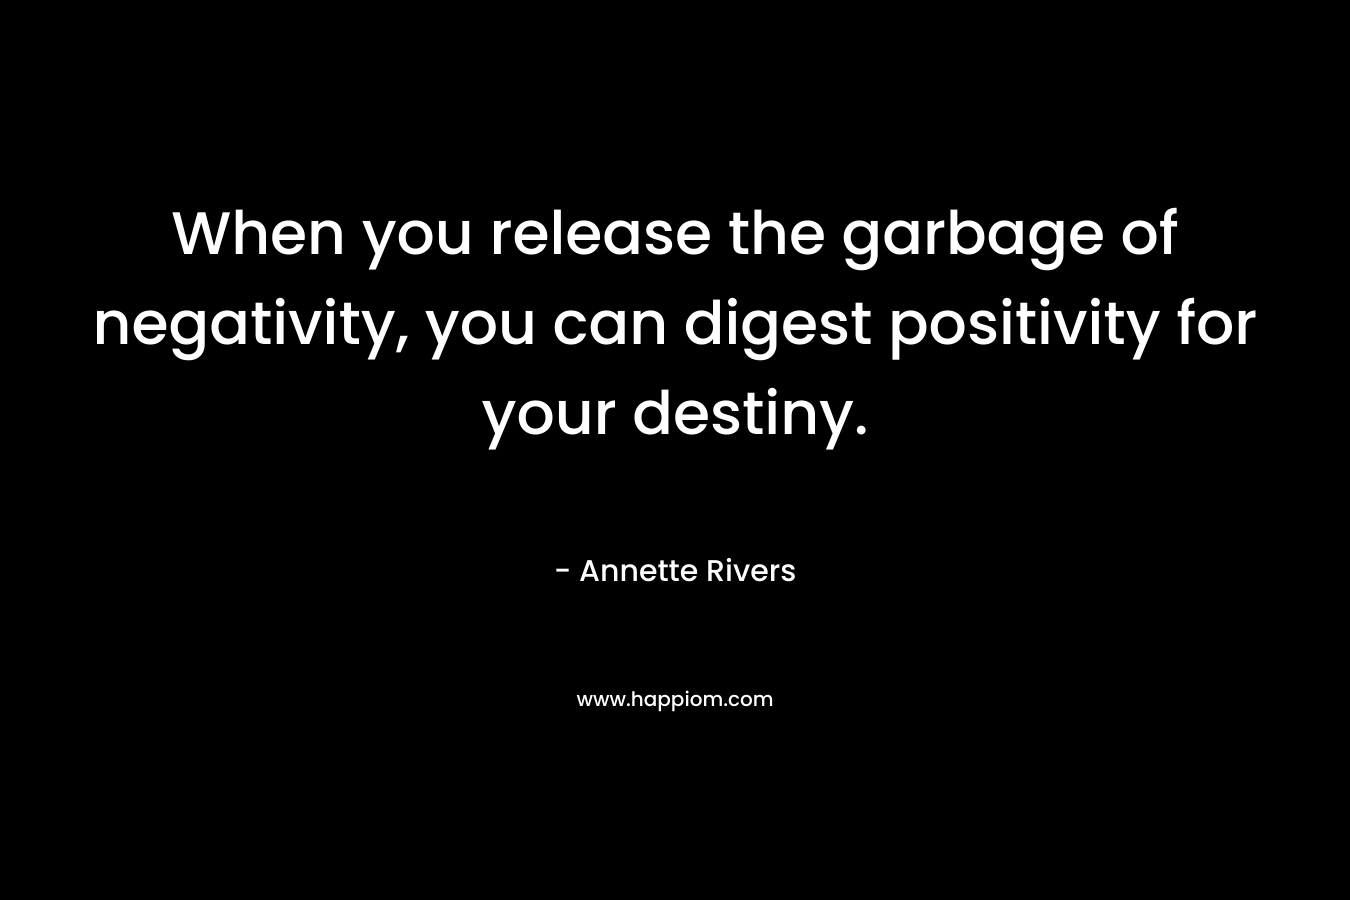 When you release the garbage of negativity, you can digest positivity for your destiny. – Annette Rivers